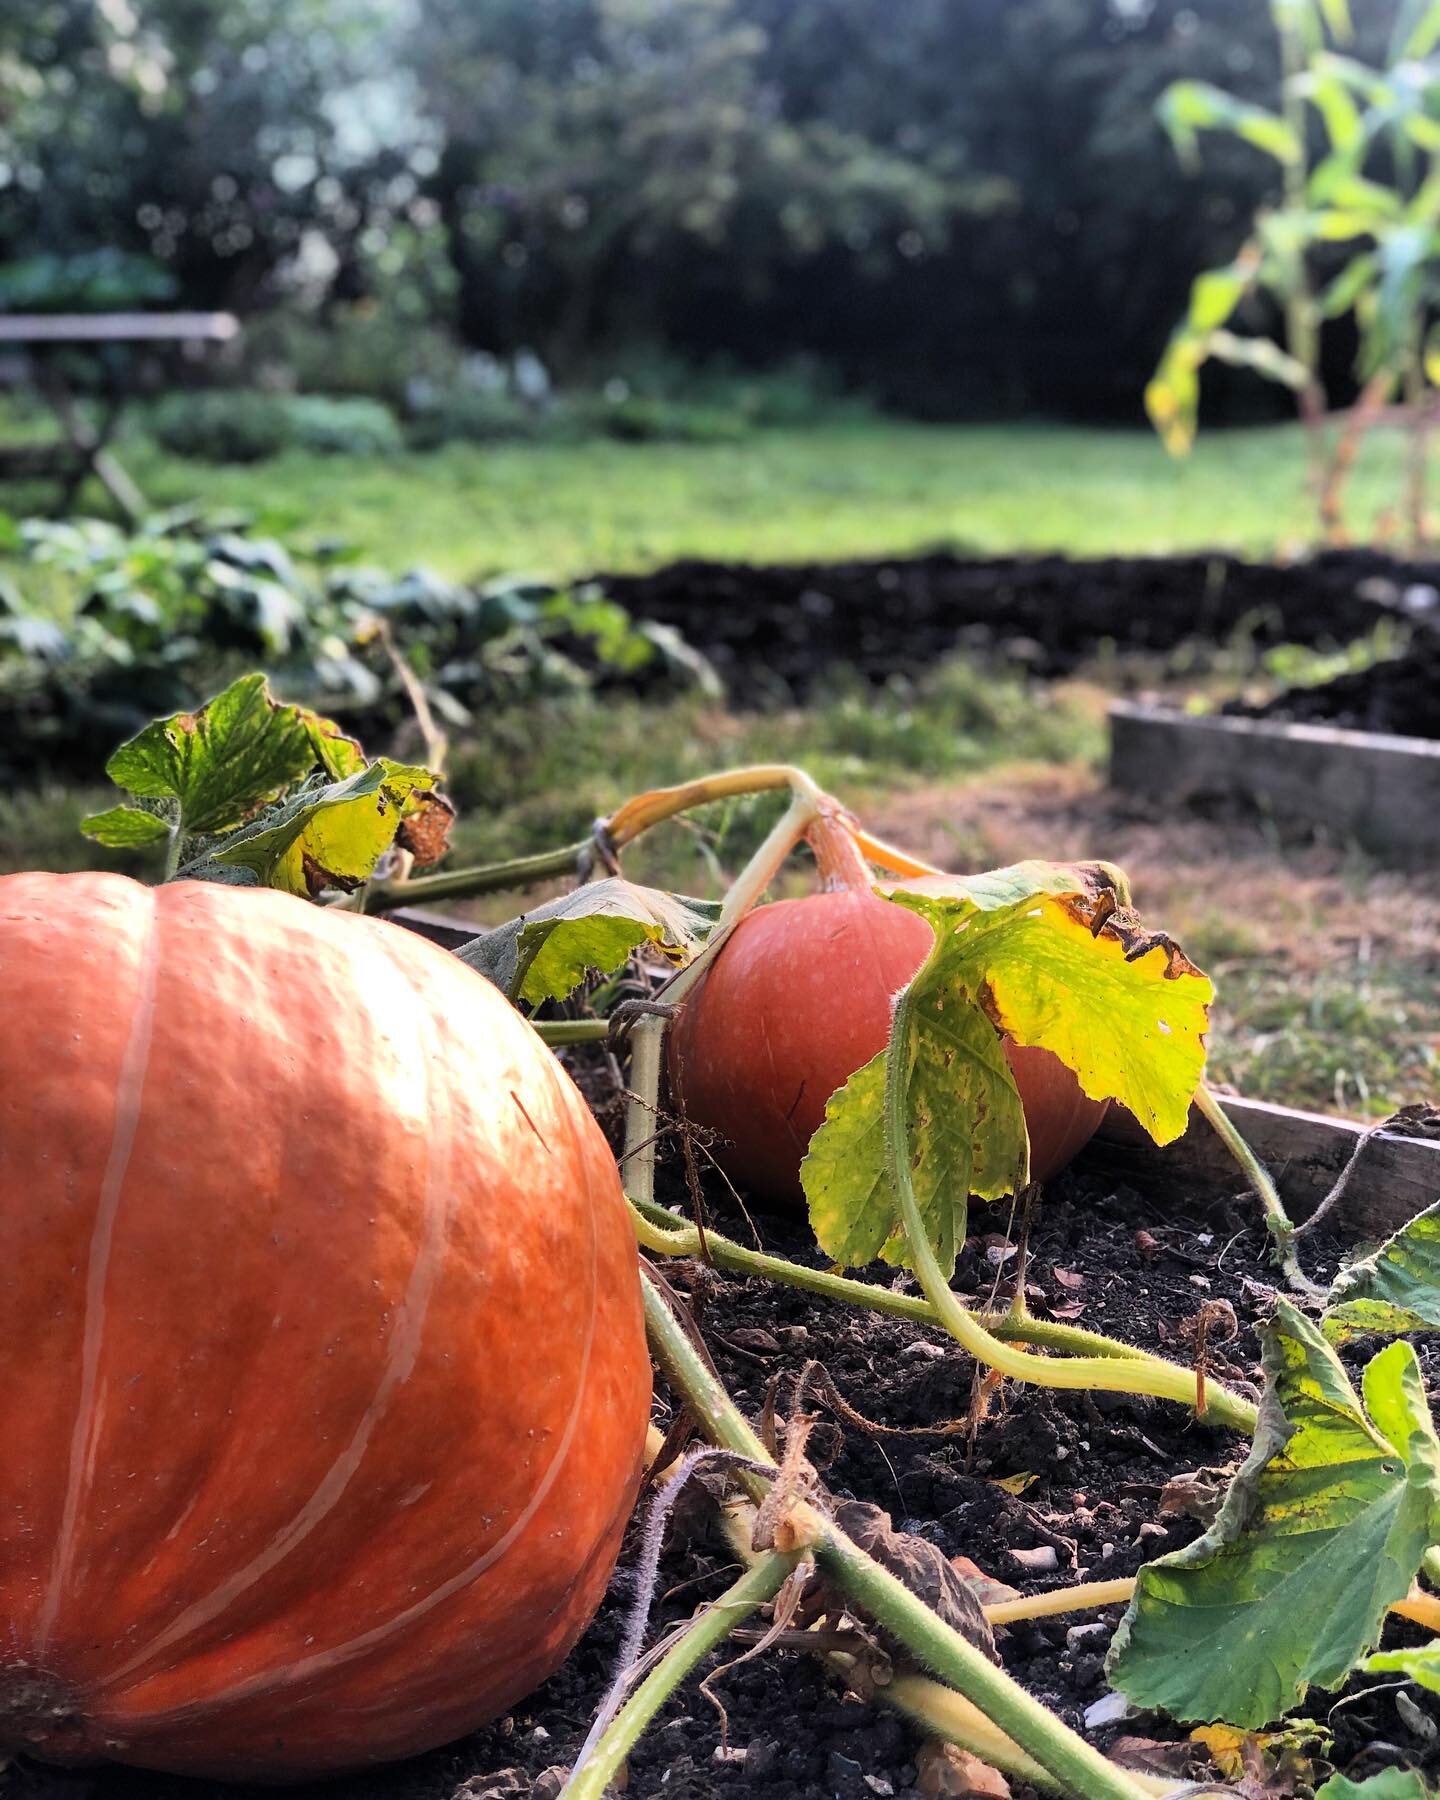 BOO! 🕸️🕷️

Happy Halloween! We grew some great pumpkins in the veg patch this year which got thoroughly enjoyed and played with by the space2play groups.

The garden is turning beautifully golden and autumnal; the benefits of the new season kicking